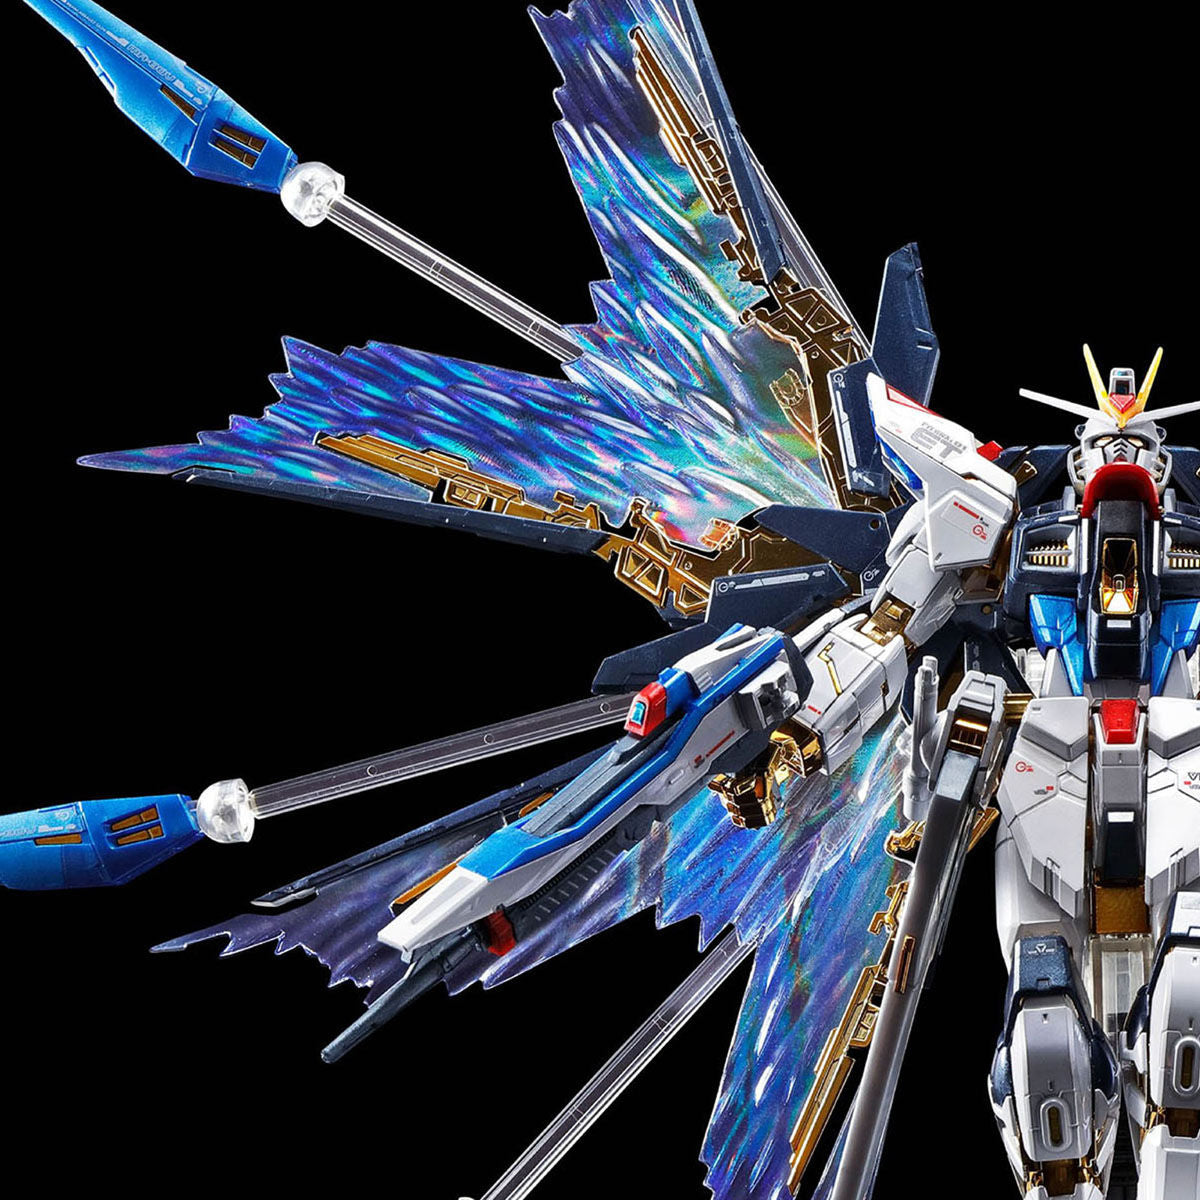 P-BANDAI: RG 1/144 STRIKE FREEDOM WINGS OF THE SKY EFFECT ***PARTS ONLY***